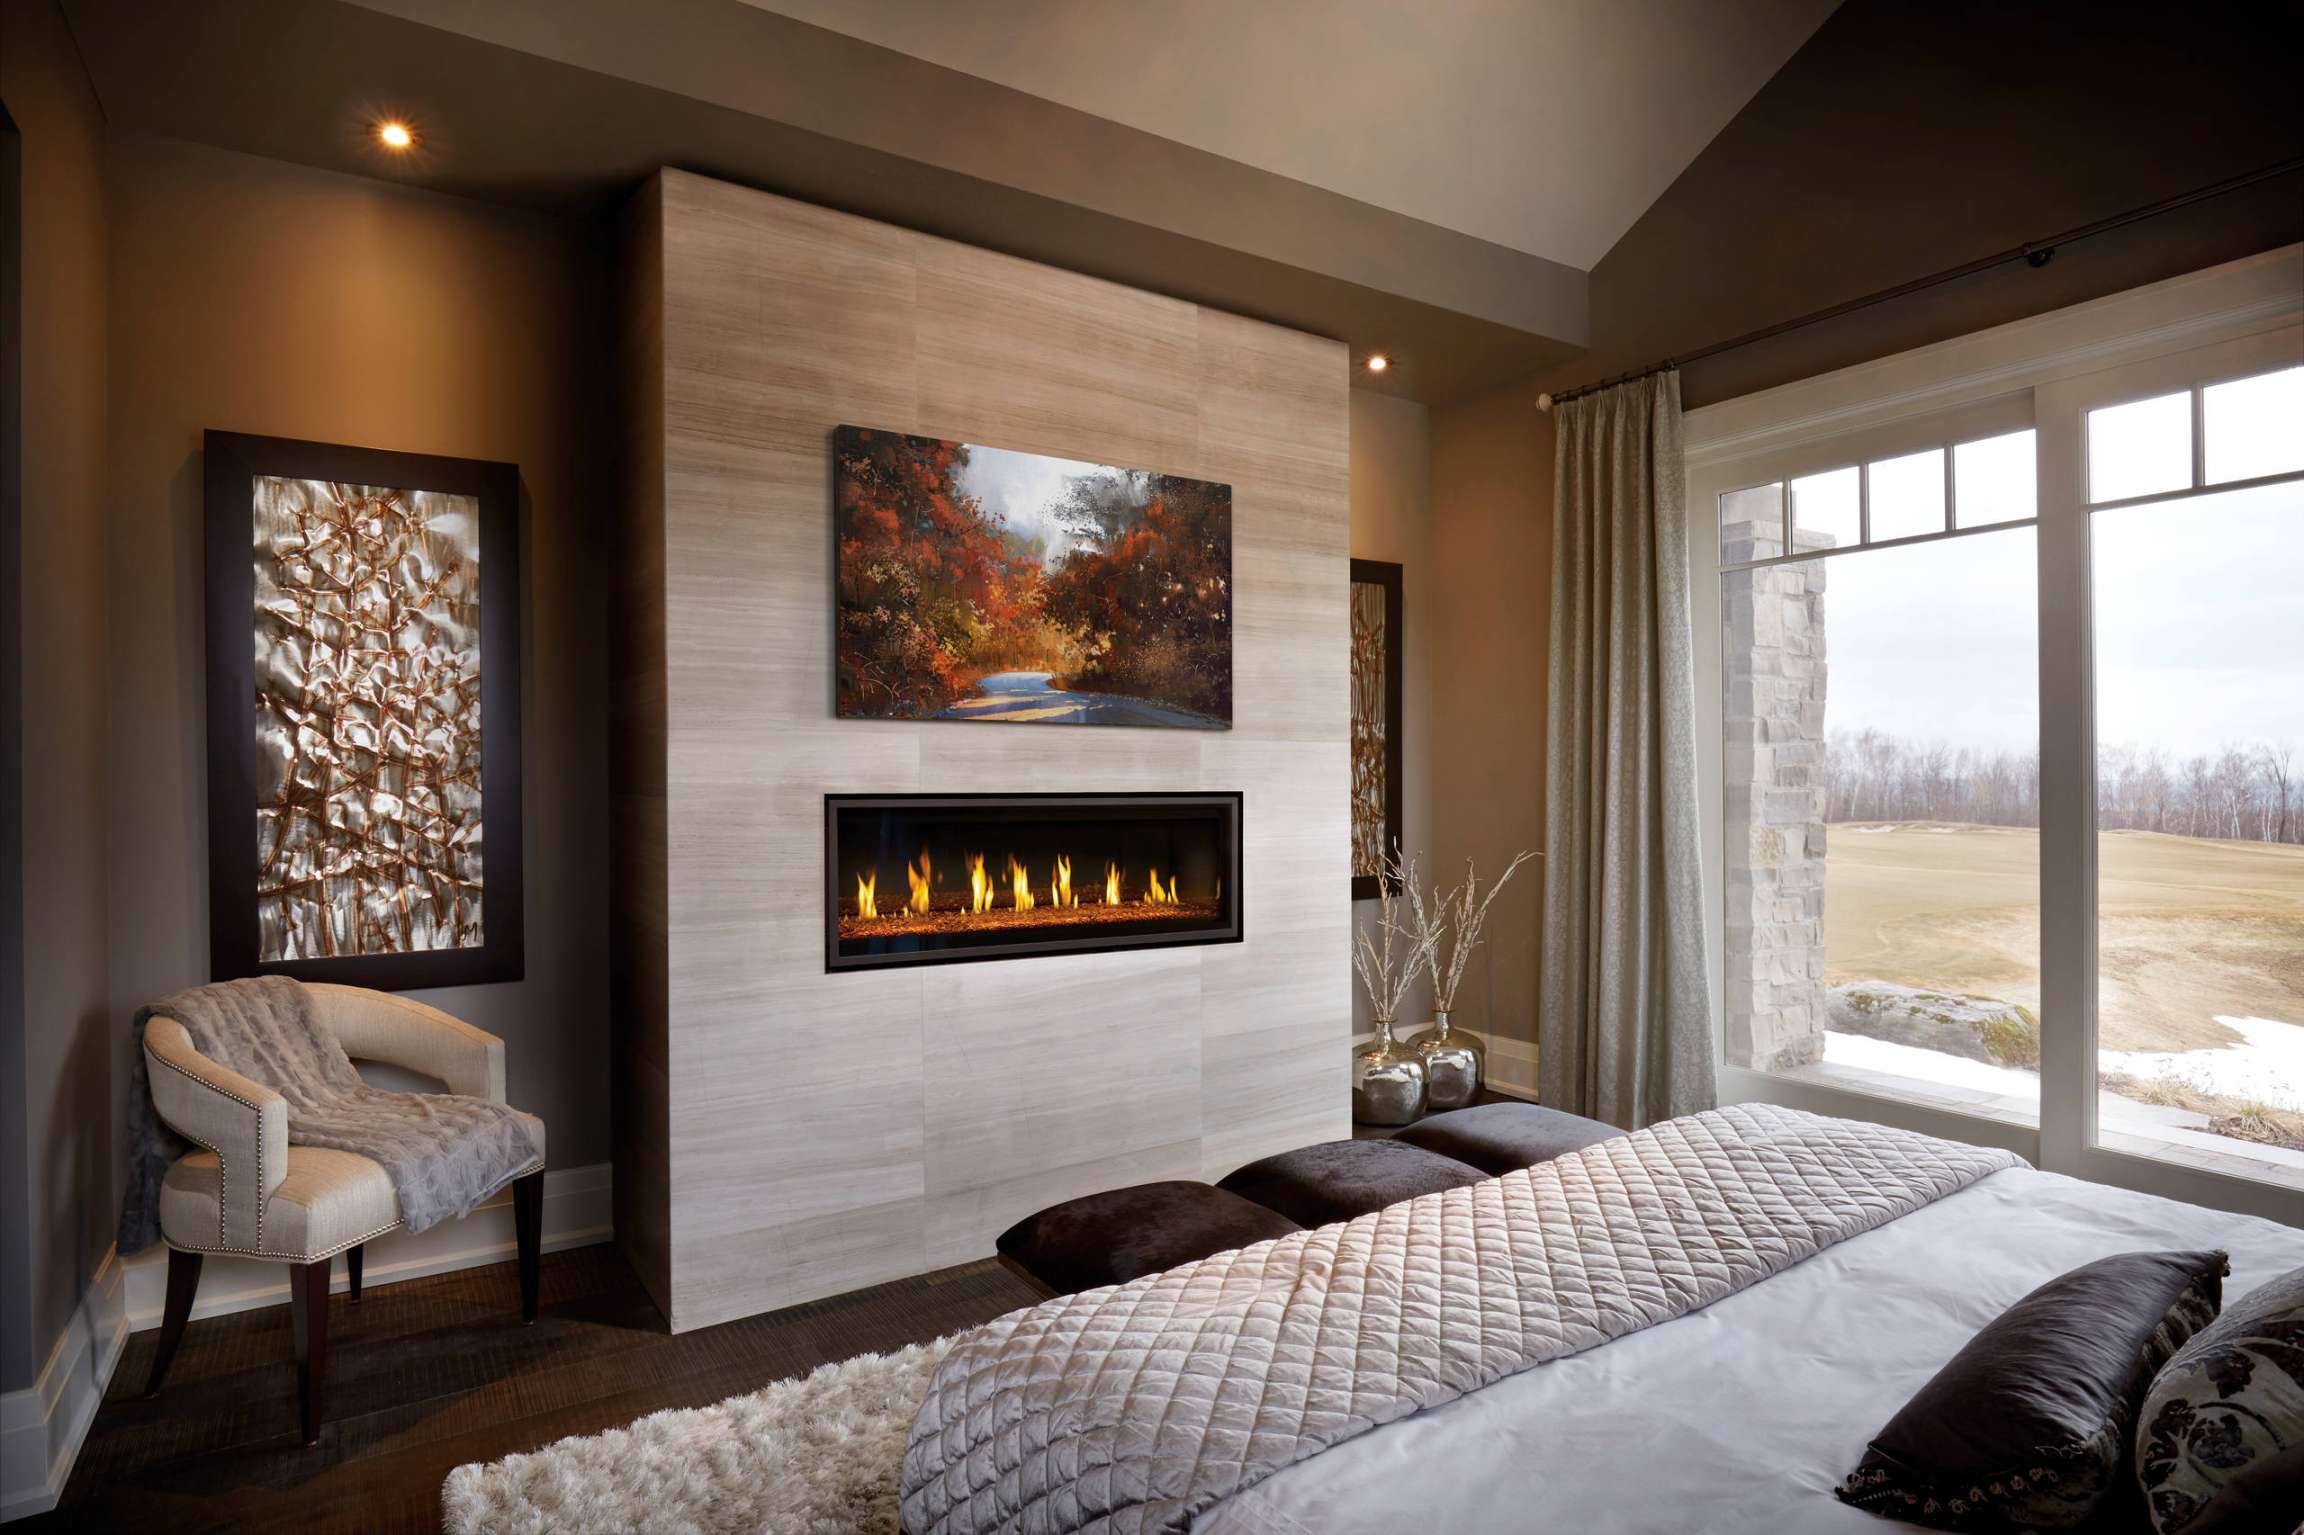 All Fireplaces Bedroom Ideas You